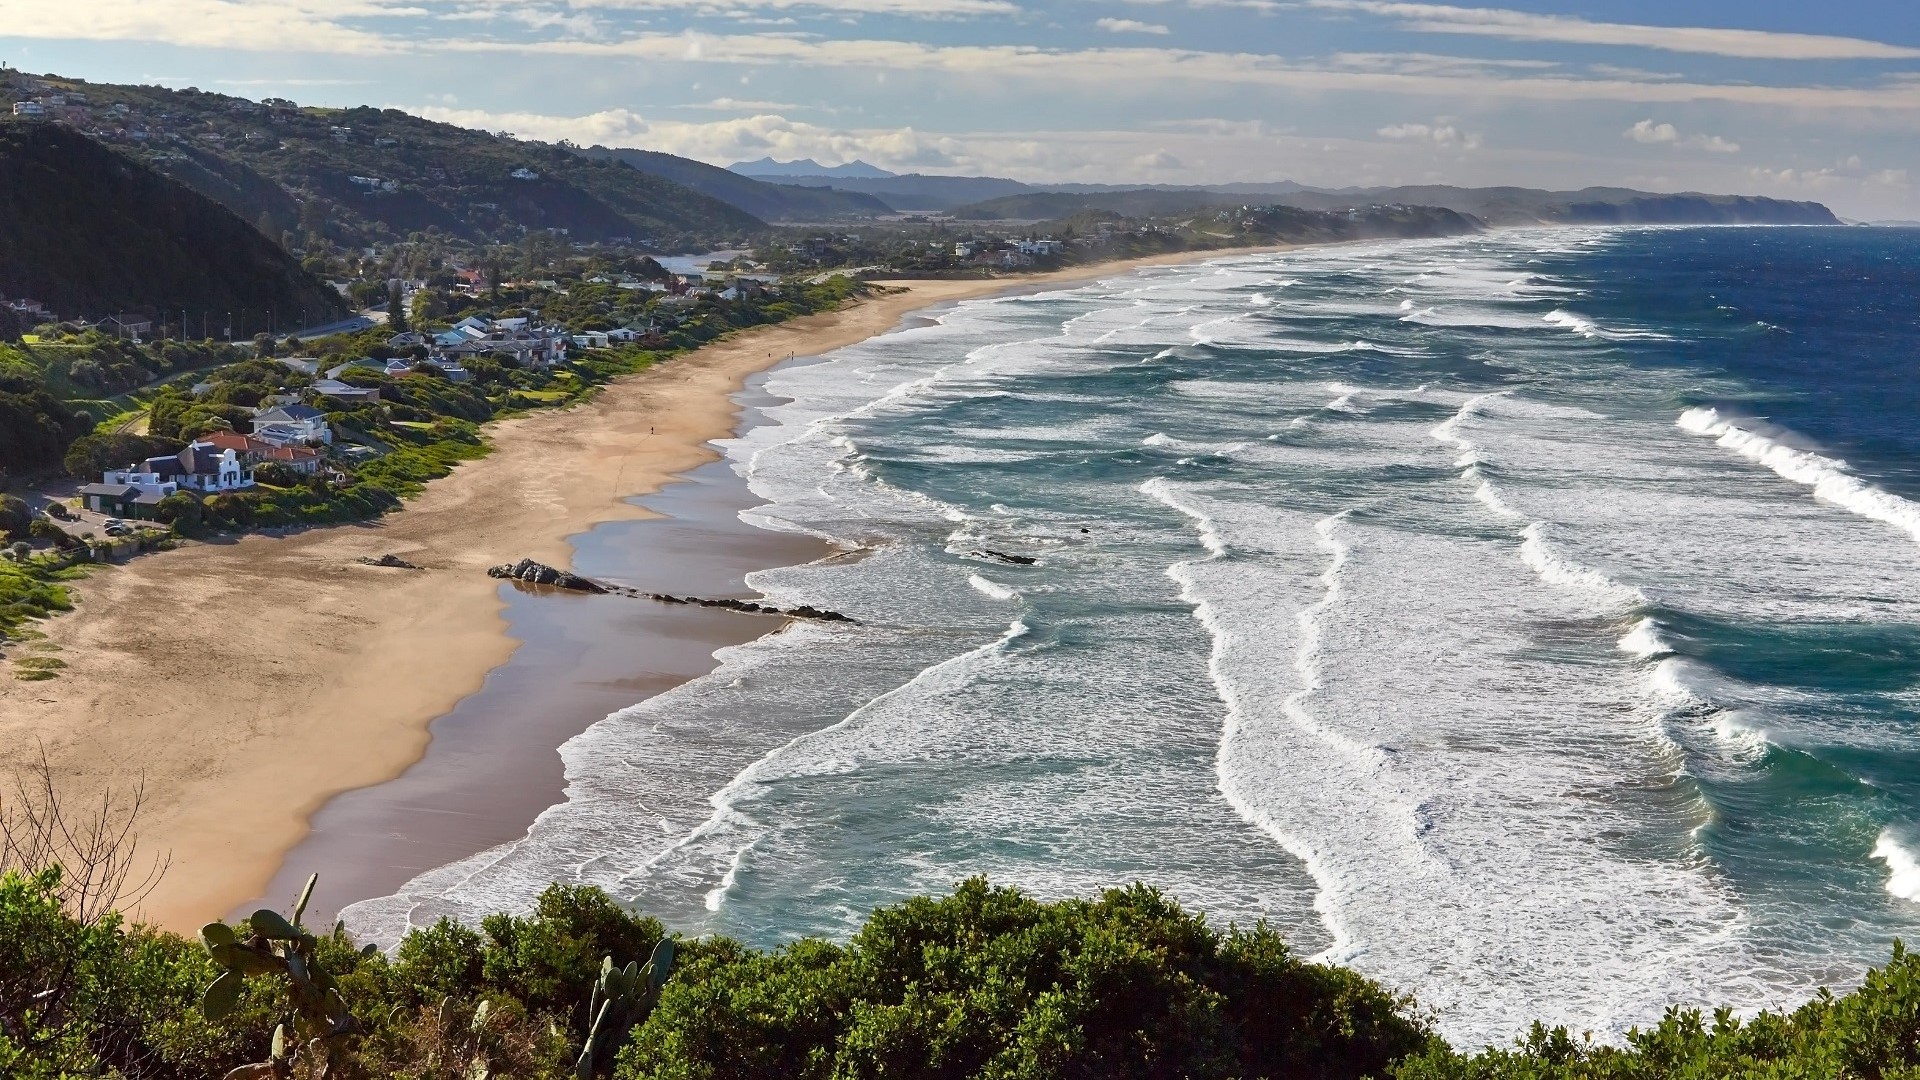 aerial view of ocean waves and coastline at Wilderness, South African beaches